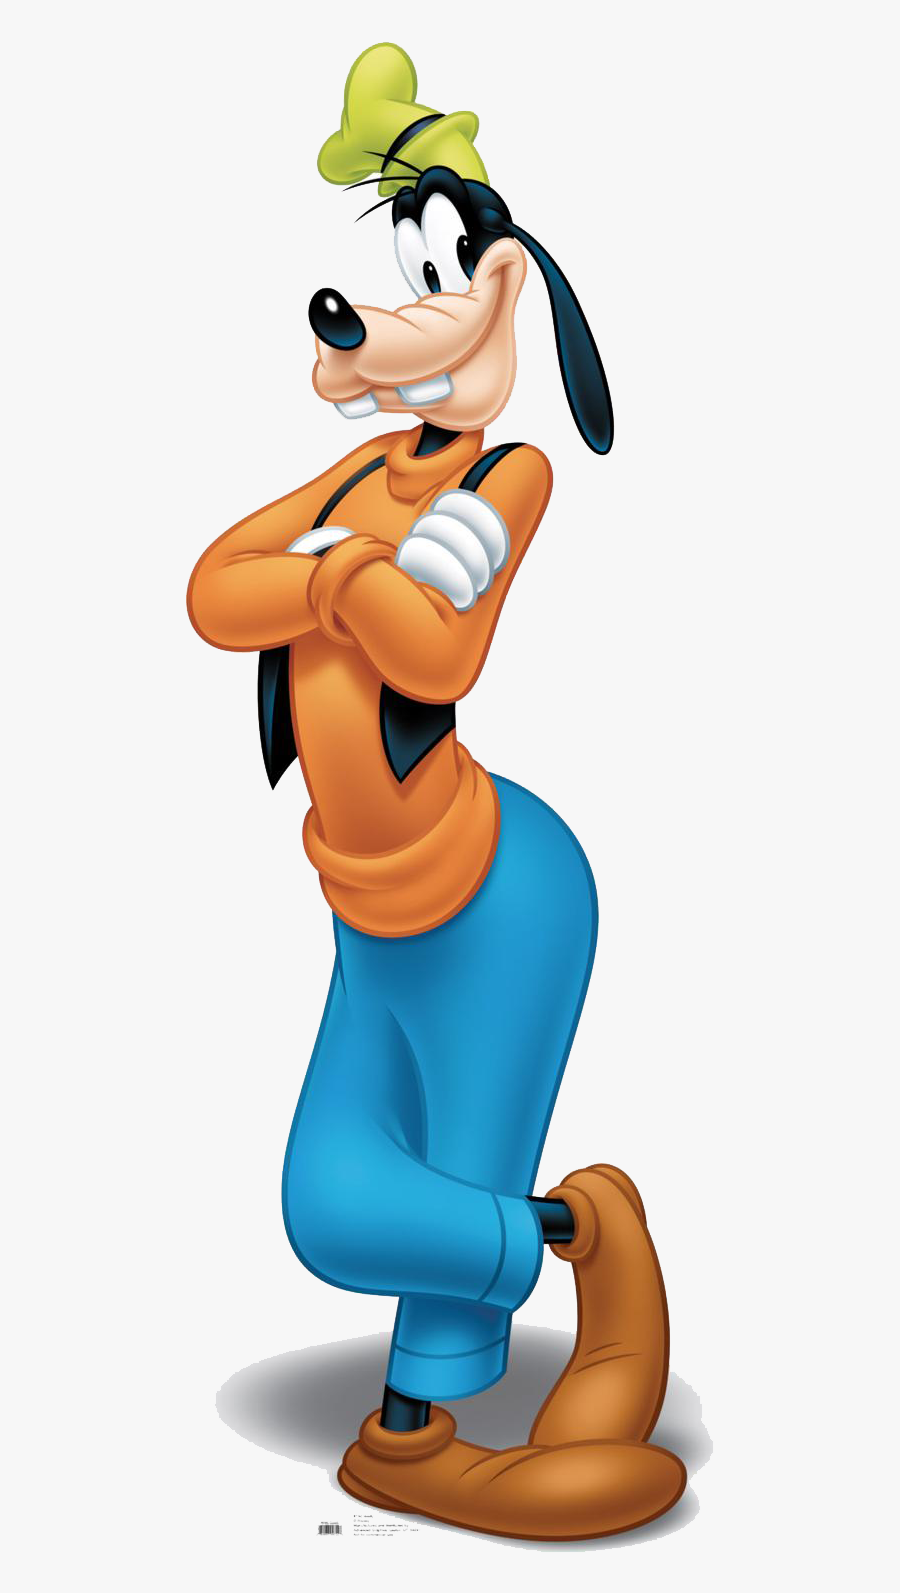 Goofy Png Image - Goofy Mickey Mouse, Transparent Clipart